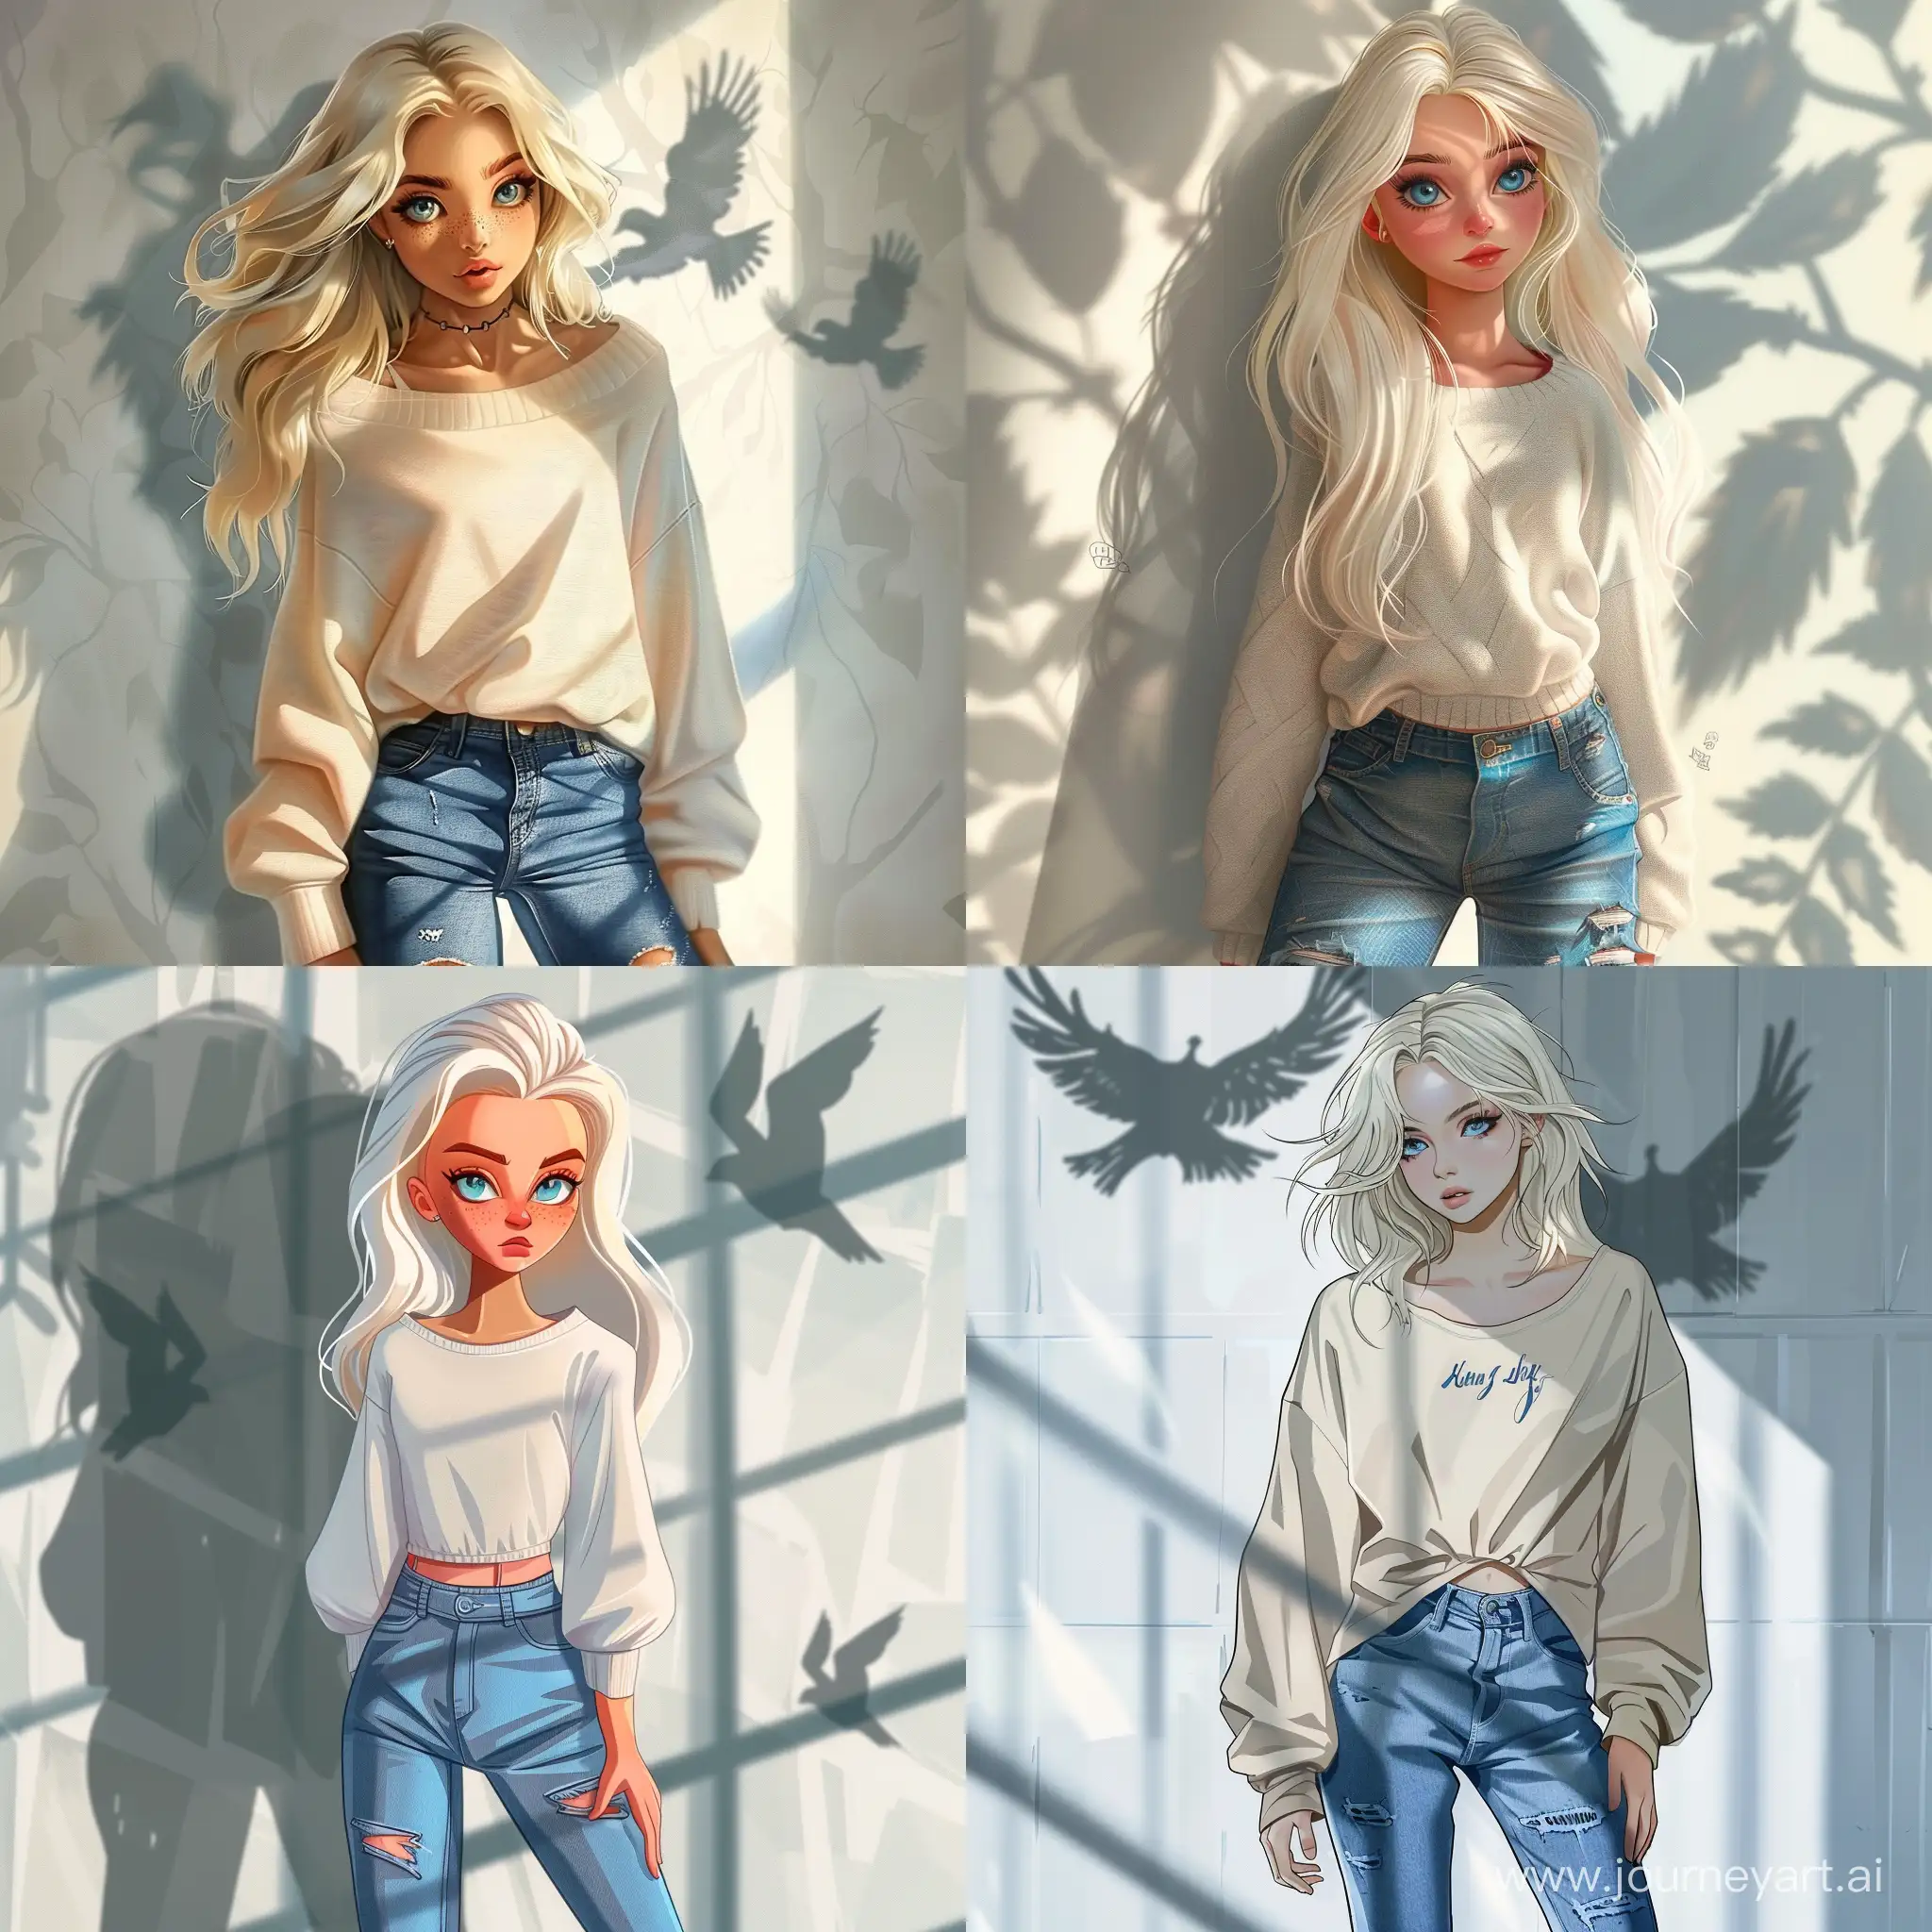 Beautiful girl, blonde hair, gray-blue eyes, white skin, teenager, 15 years old, jeans and oversize sweatshirt, shadow of wings on the brick wall behind, high quality, high detail, cartoon art